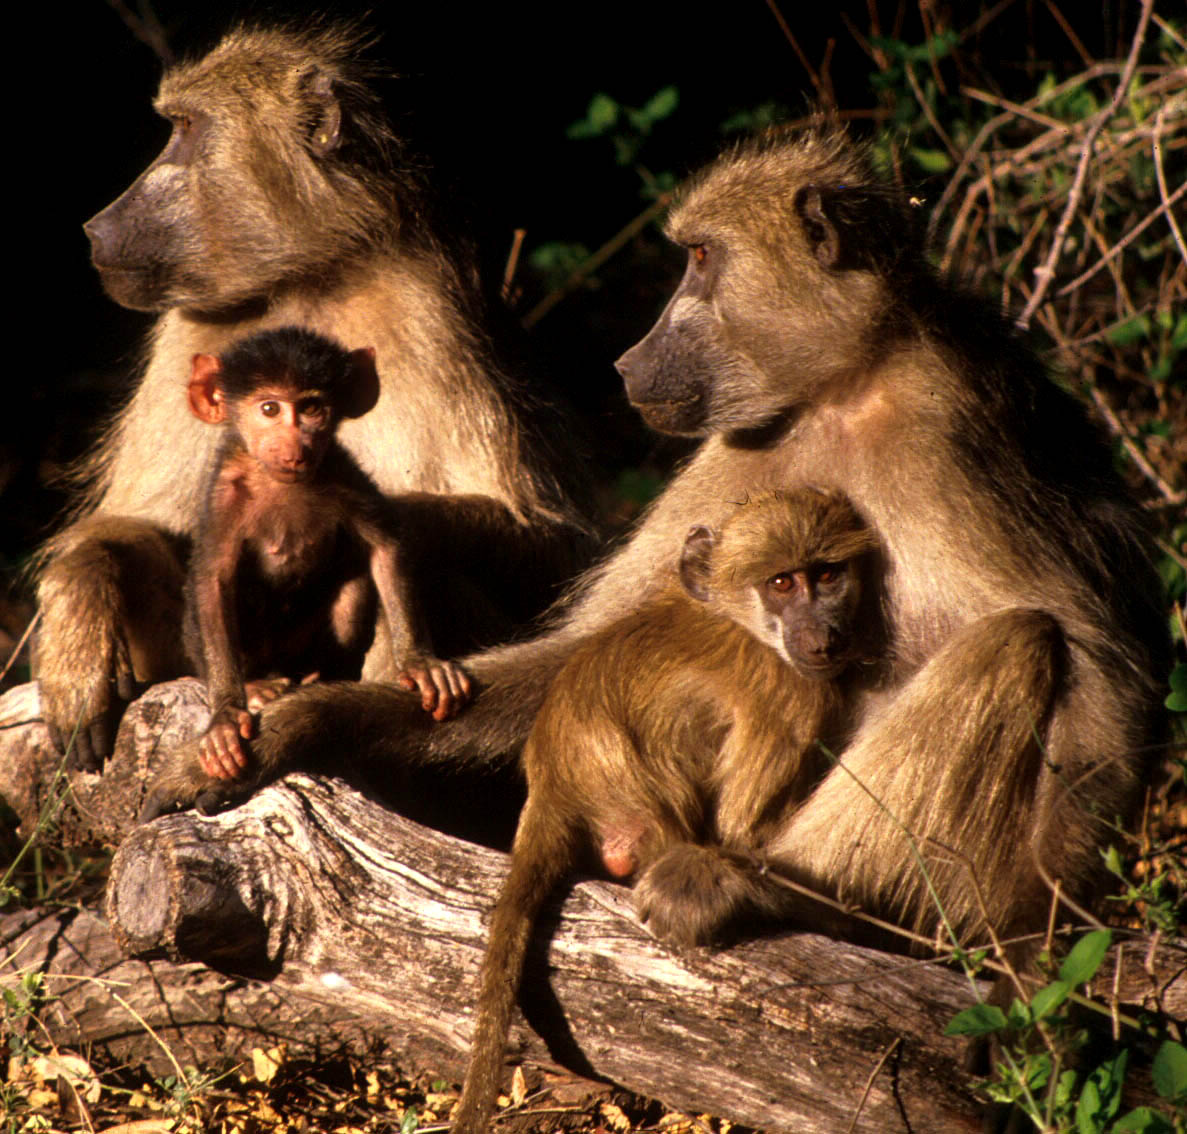 Tomorrow is World Baboon Day. I expect the internet to be flooded with baboon pictures. Don't let the baboons down.